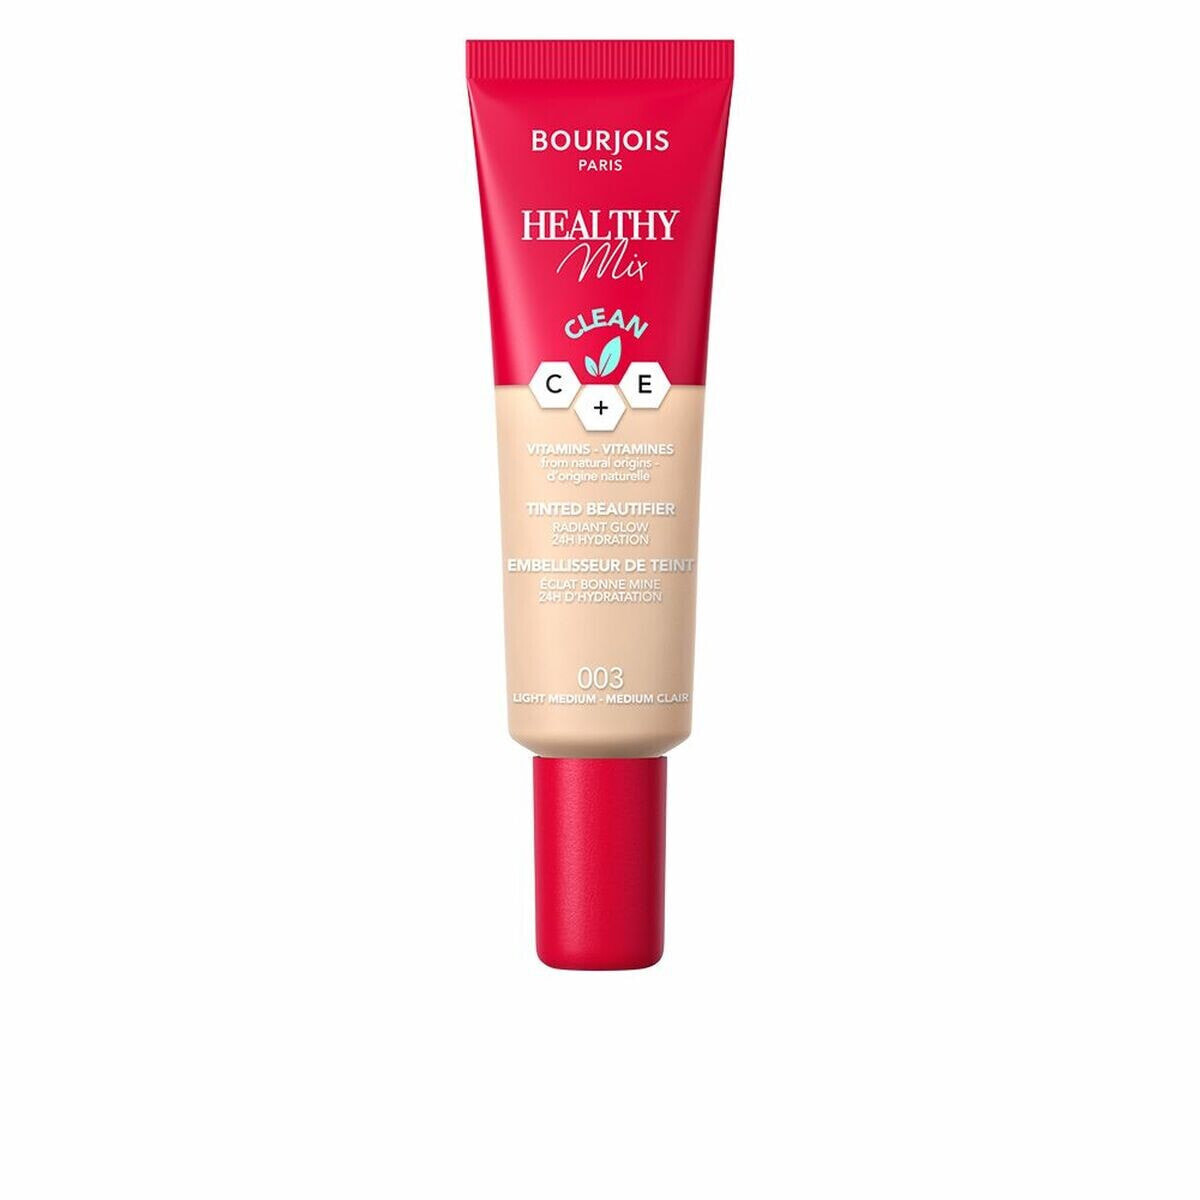 Hydrating Cream with Colour Bourjois Healthy Mix Nº 003 30 ml